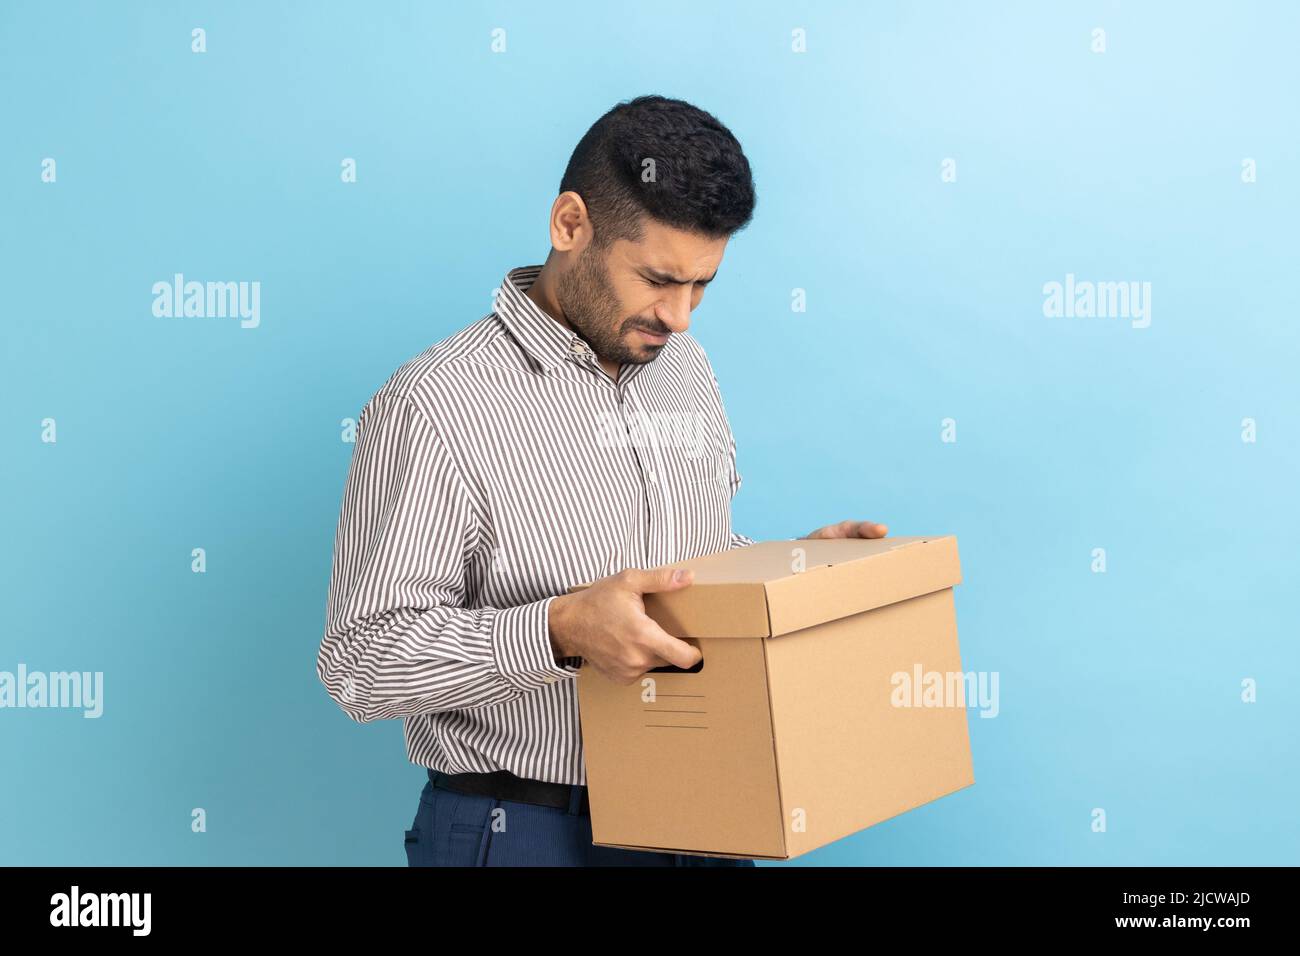 Portrait of sad worker man holding cardboard parcel, upset about being fired at work, crying, expressing sorrow, wearing striped shirt. Indoor studio shot isolated on blue background. Stock Photo